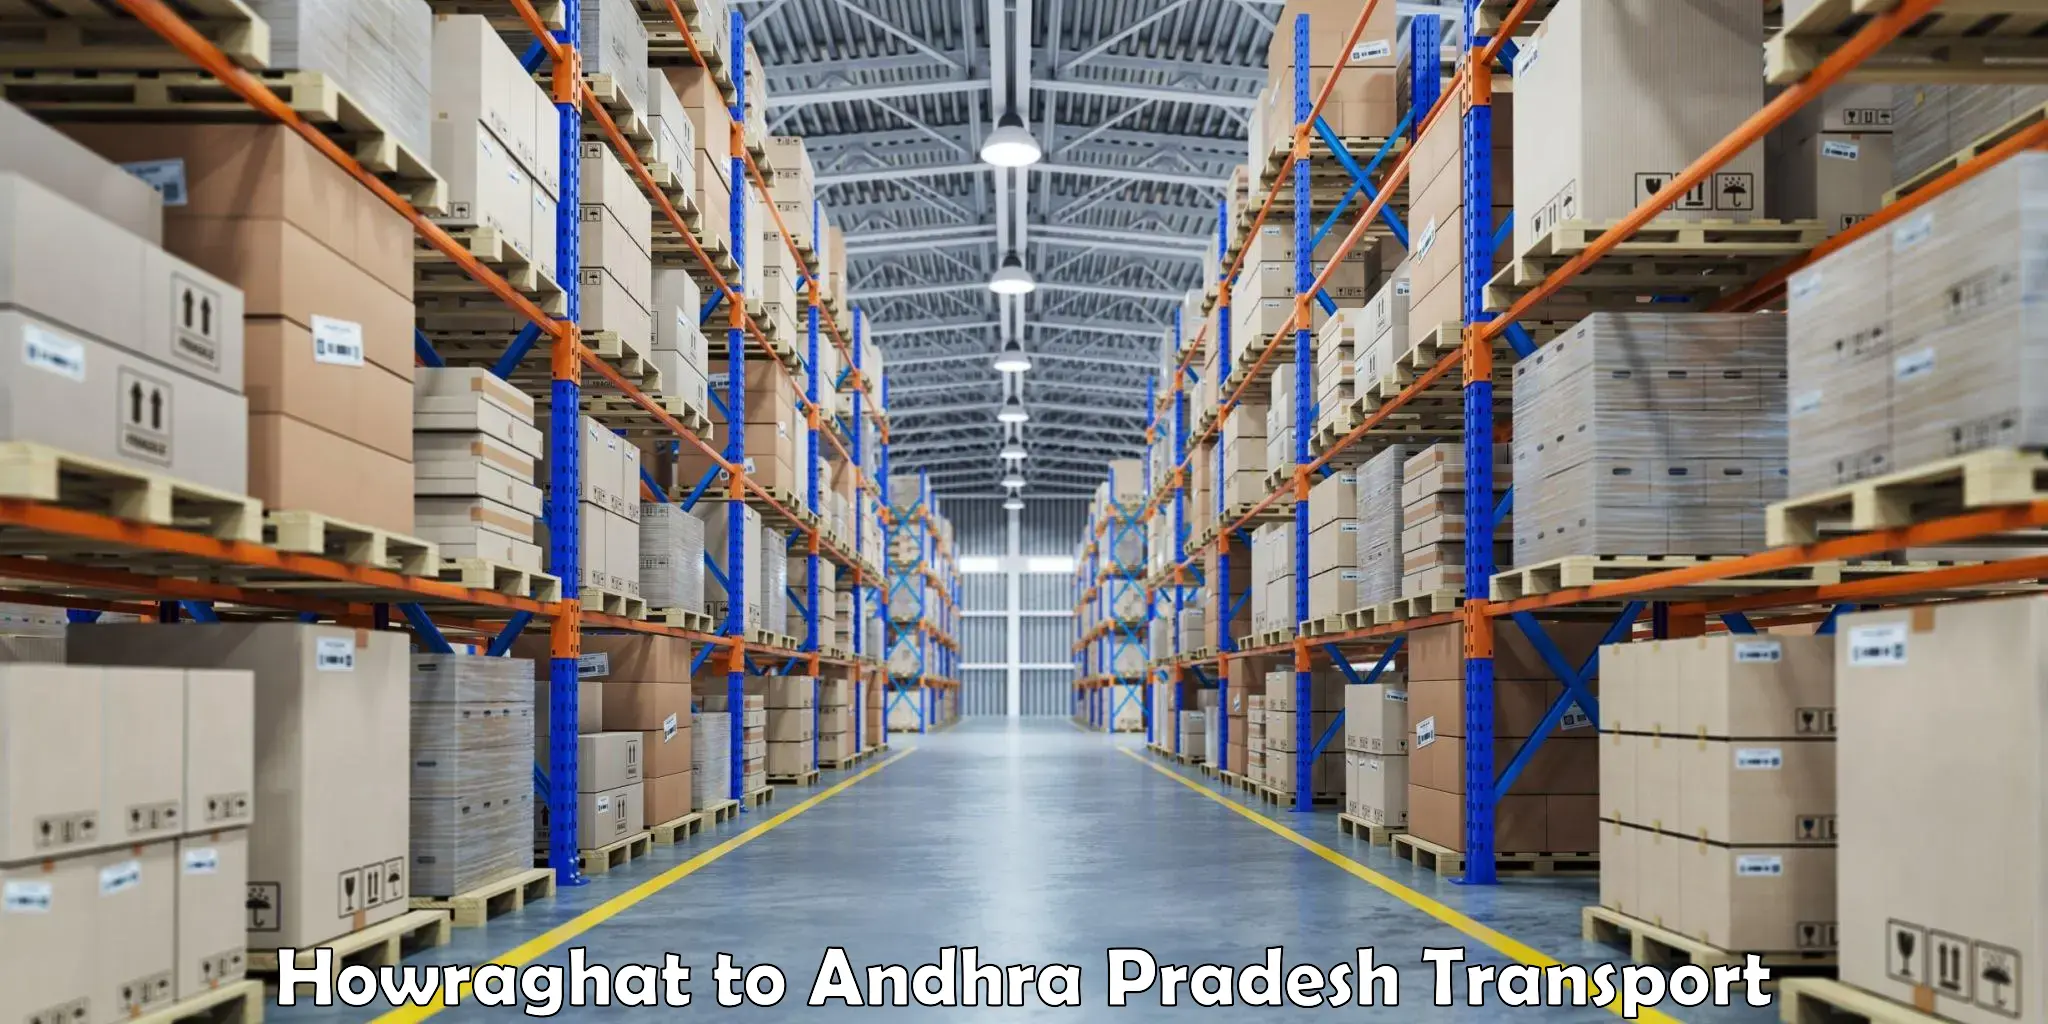 Part load transport service in India in Howraghat to Gopalapuram